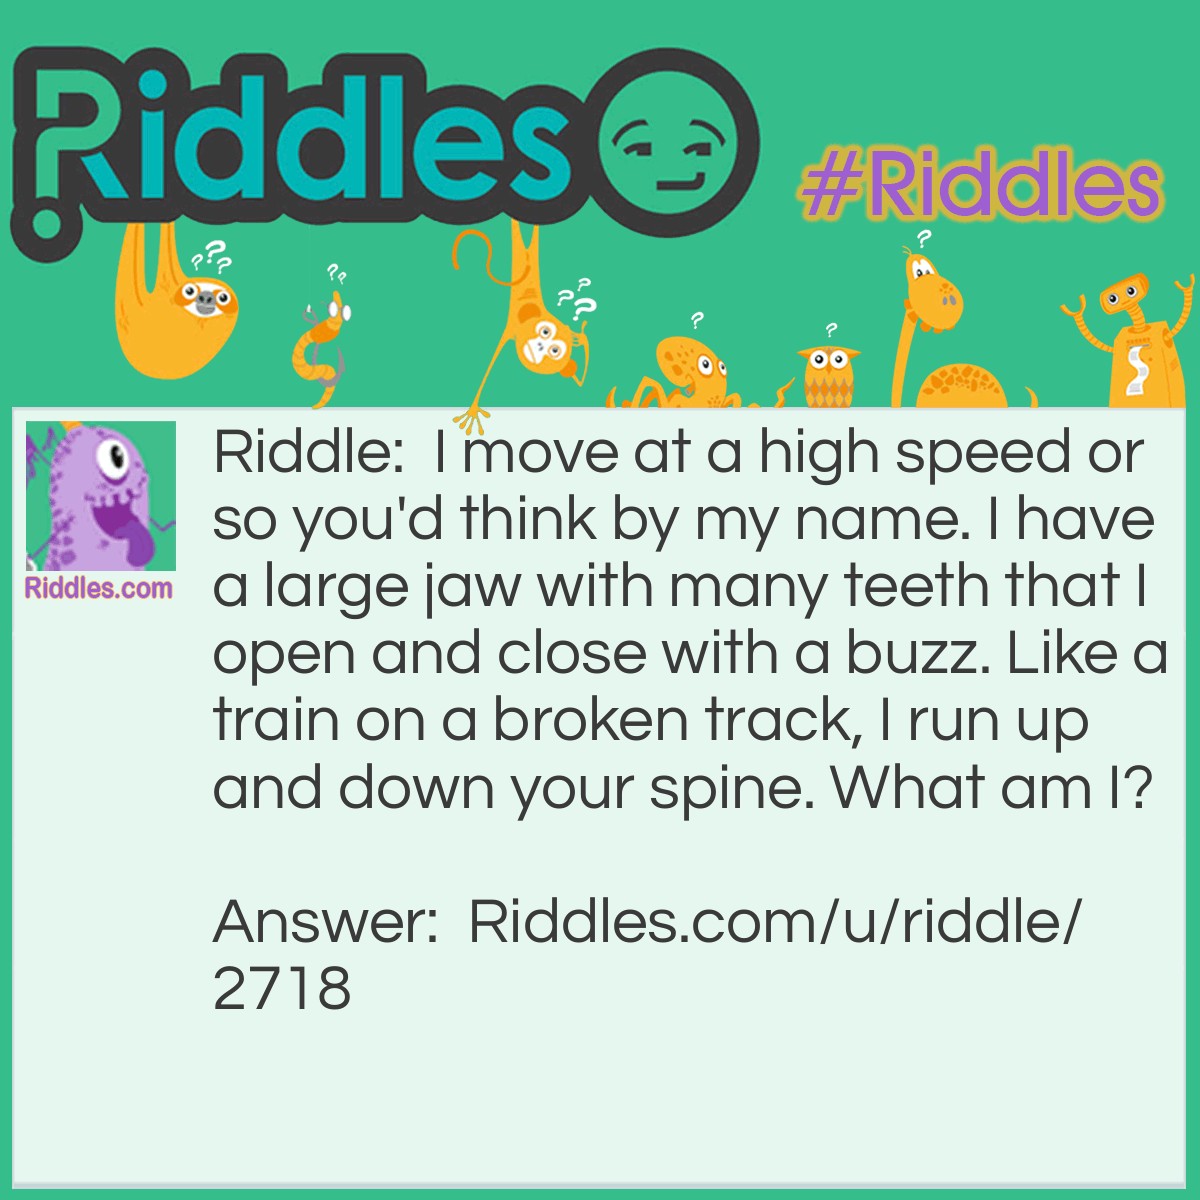 Riddle: I move at a high speed or so you'd think by my name. I have a large jaw with many teeth that I open and close with a buzz. Like a train on a broken track, I run up and down your spine. What am I? Answer: A Zipper.